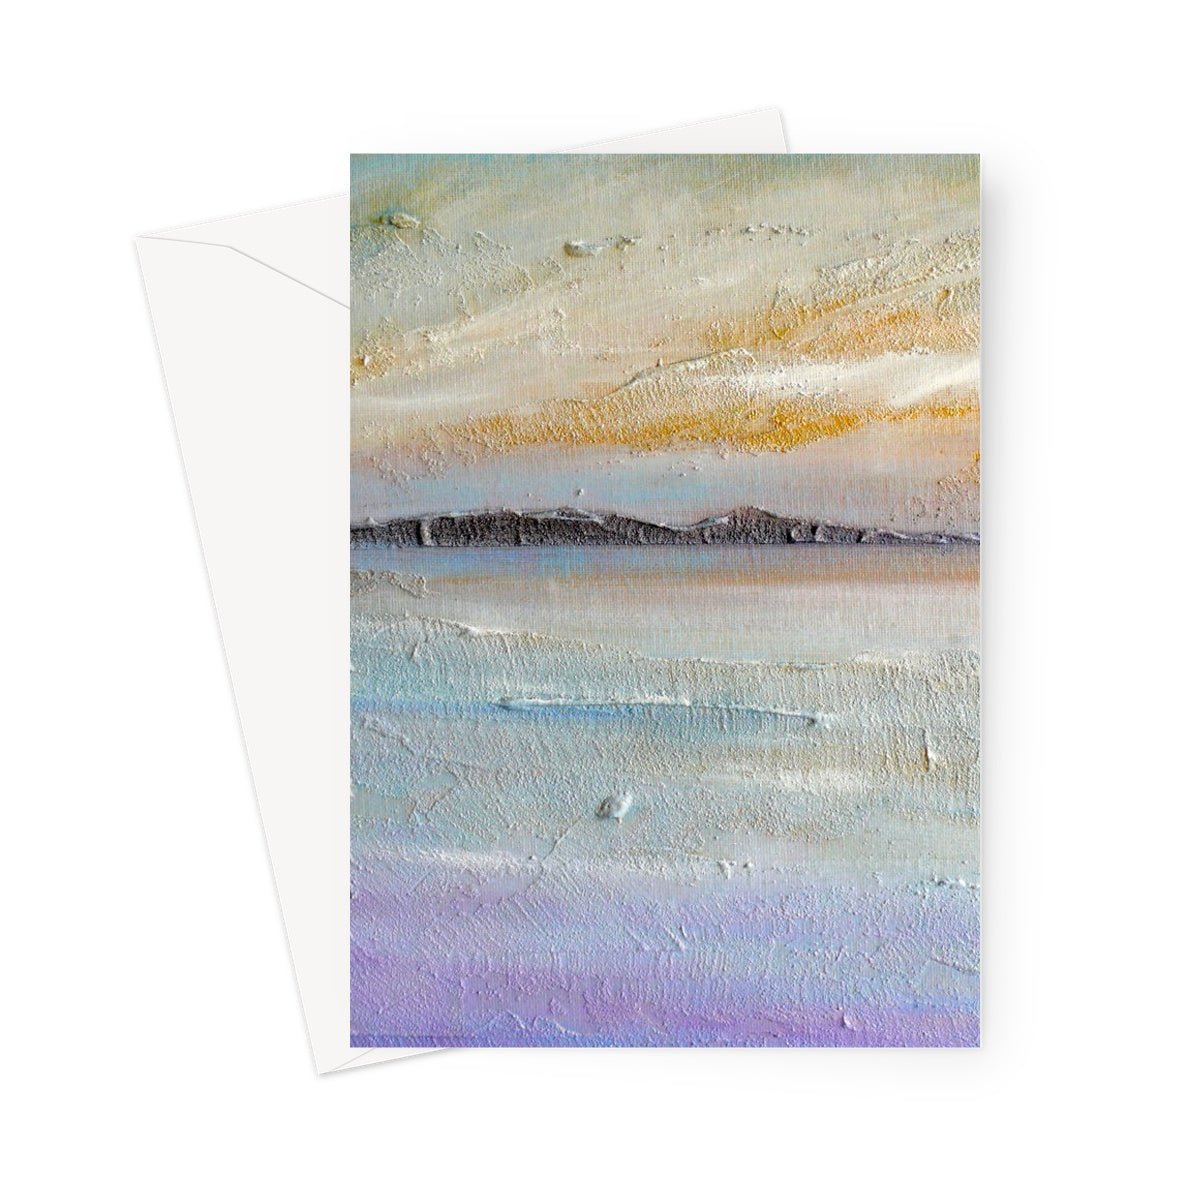 Sollas Beach South Uist Art Gifts Greeting Card-Greetings Cards-Hebridean Islands Art Gallery-5"x7"-1 Card-Paintings, Prints, Homeware, Art Gifts From Scotland By Scottish Artist Kevin Hunter